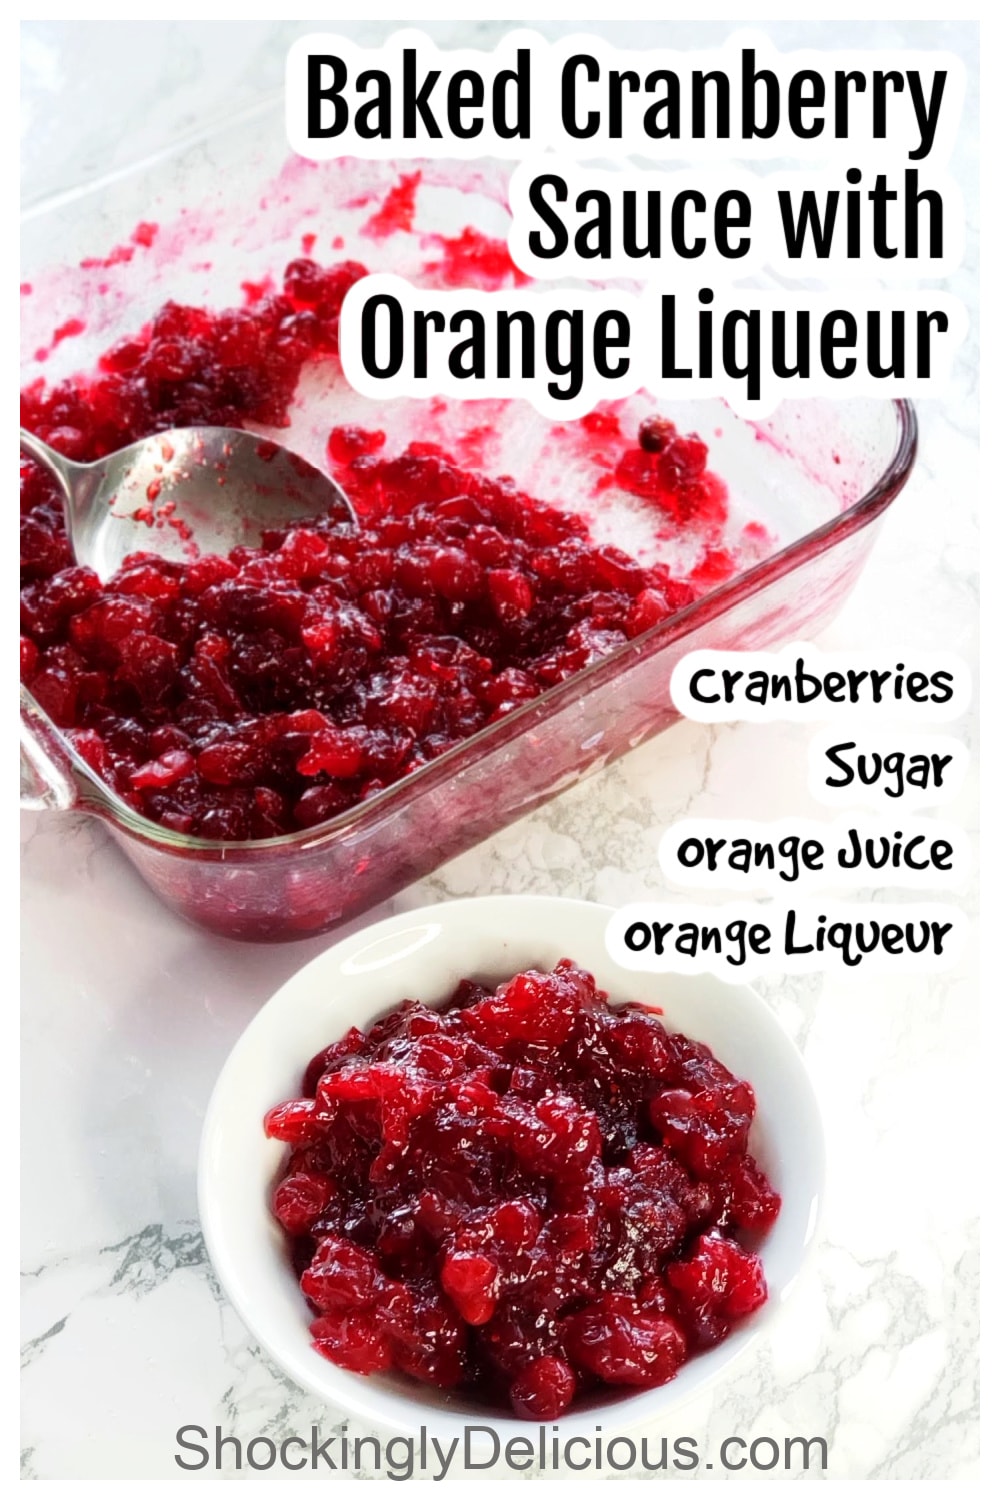 Baked Cranberry Sauce with Orange Liqueur Pinterest Pin photo of prepared sauce with recipe title superimposed on top